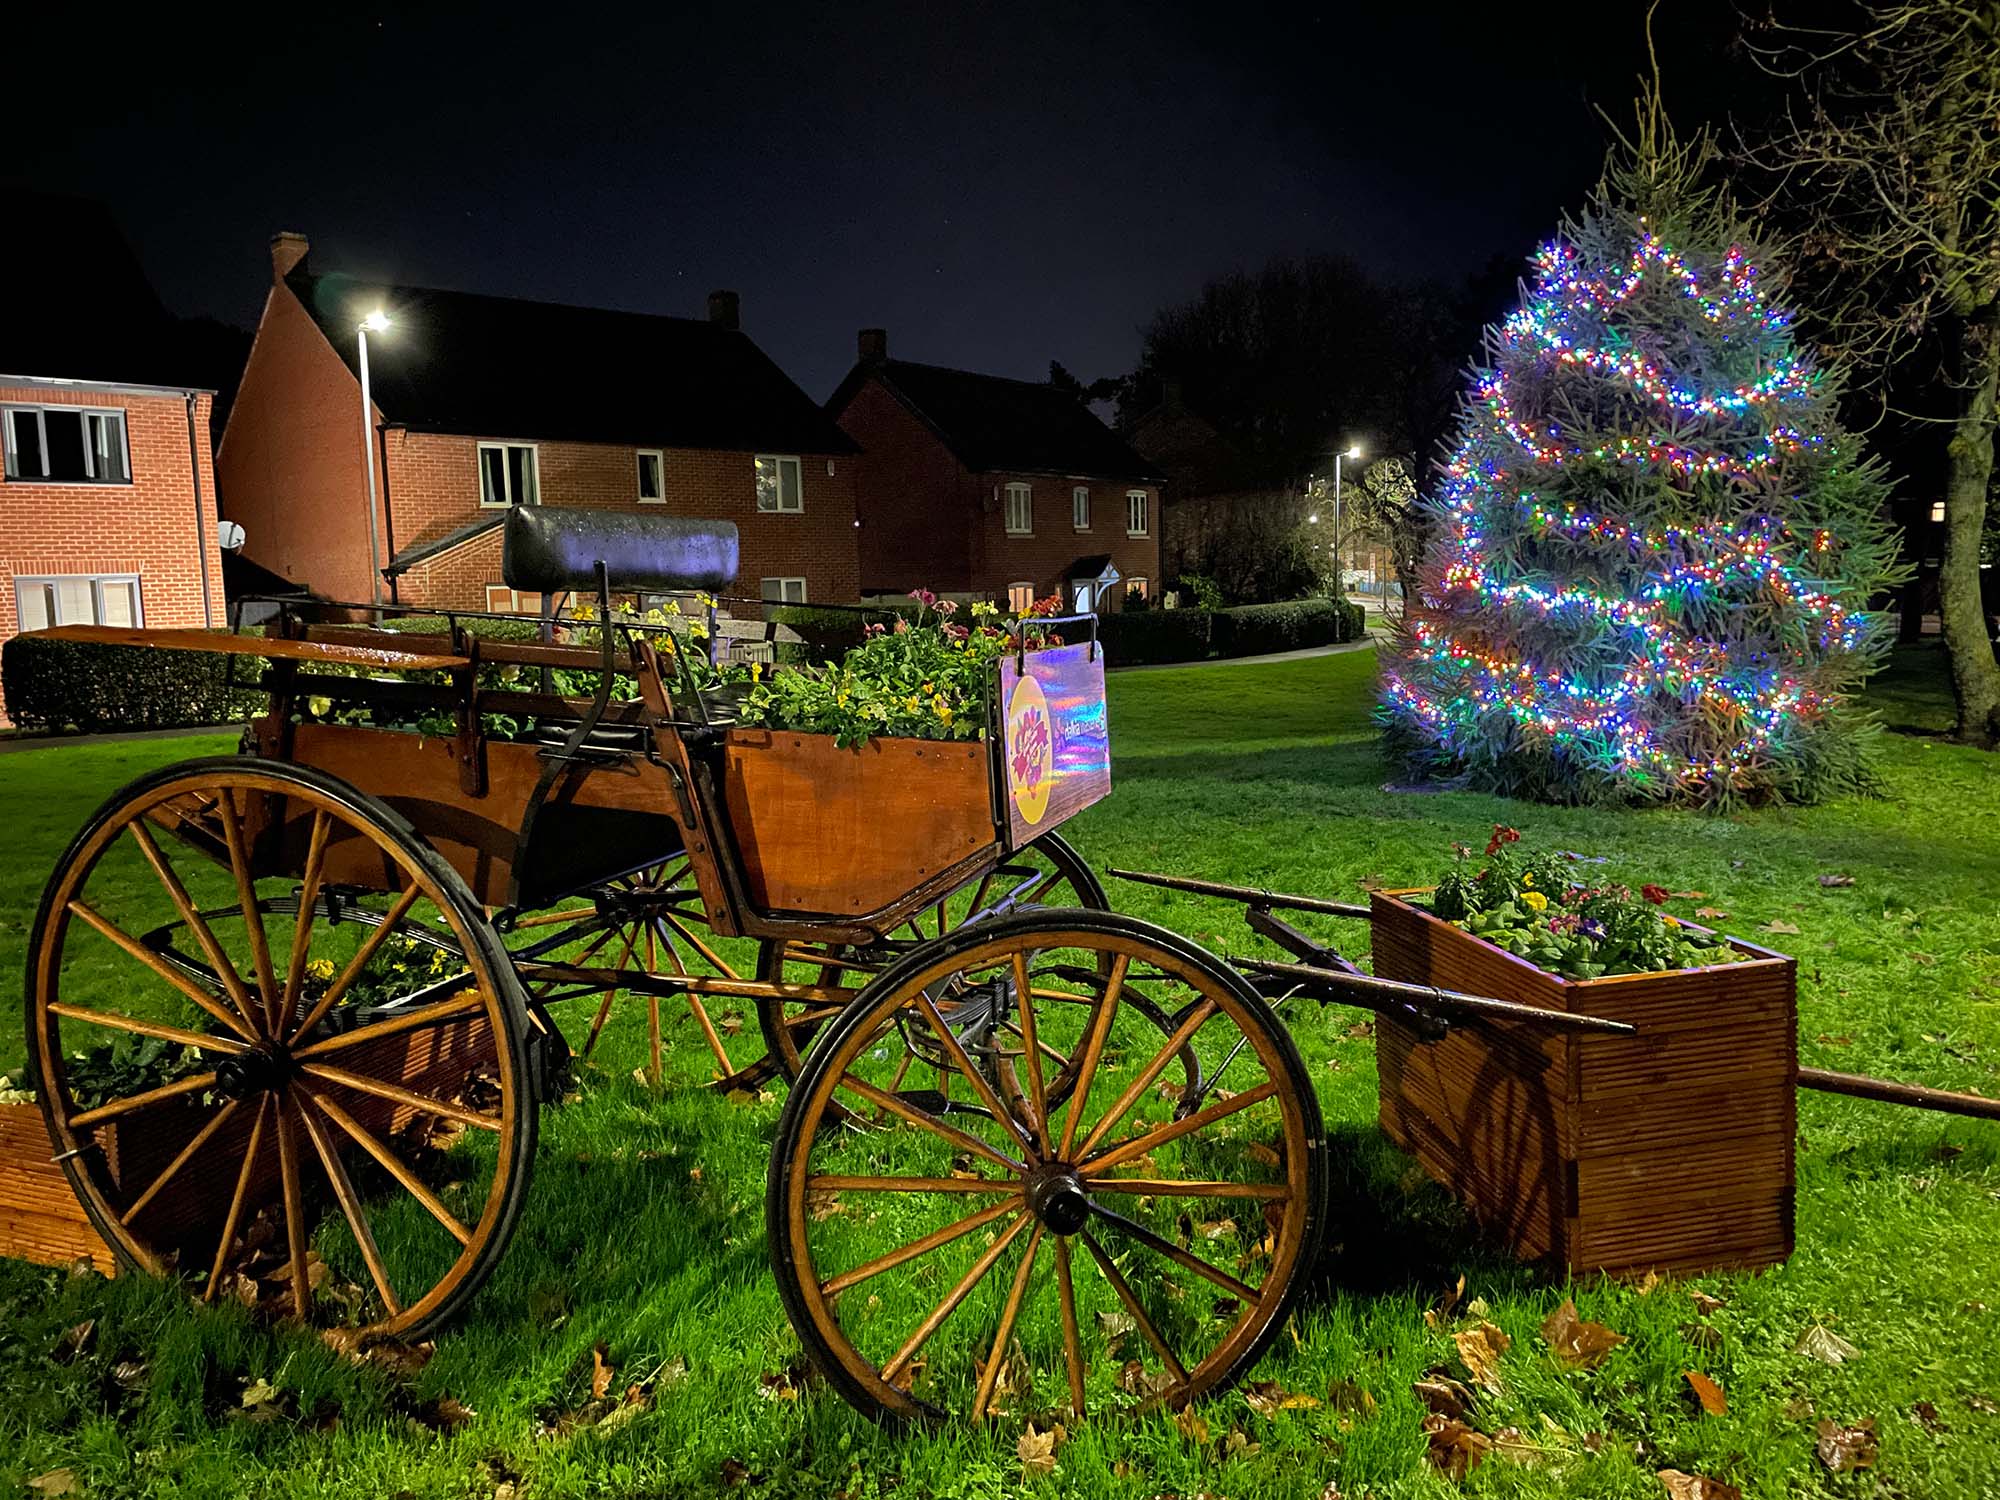 An image depicting a refurbished pony cart, now used as a flower planter, with a Christmas tree in the background draped in lights